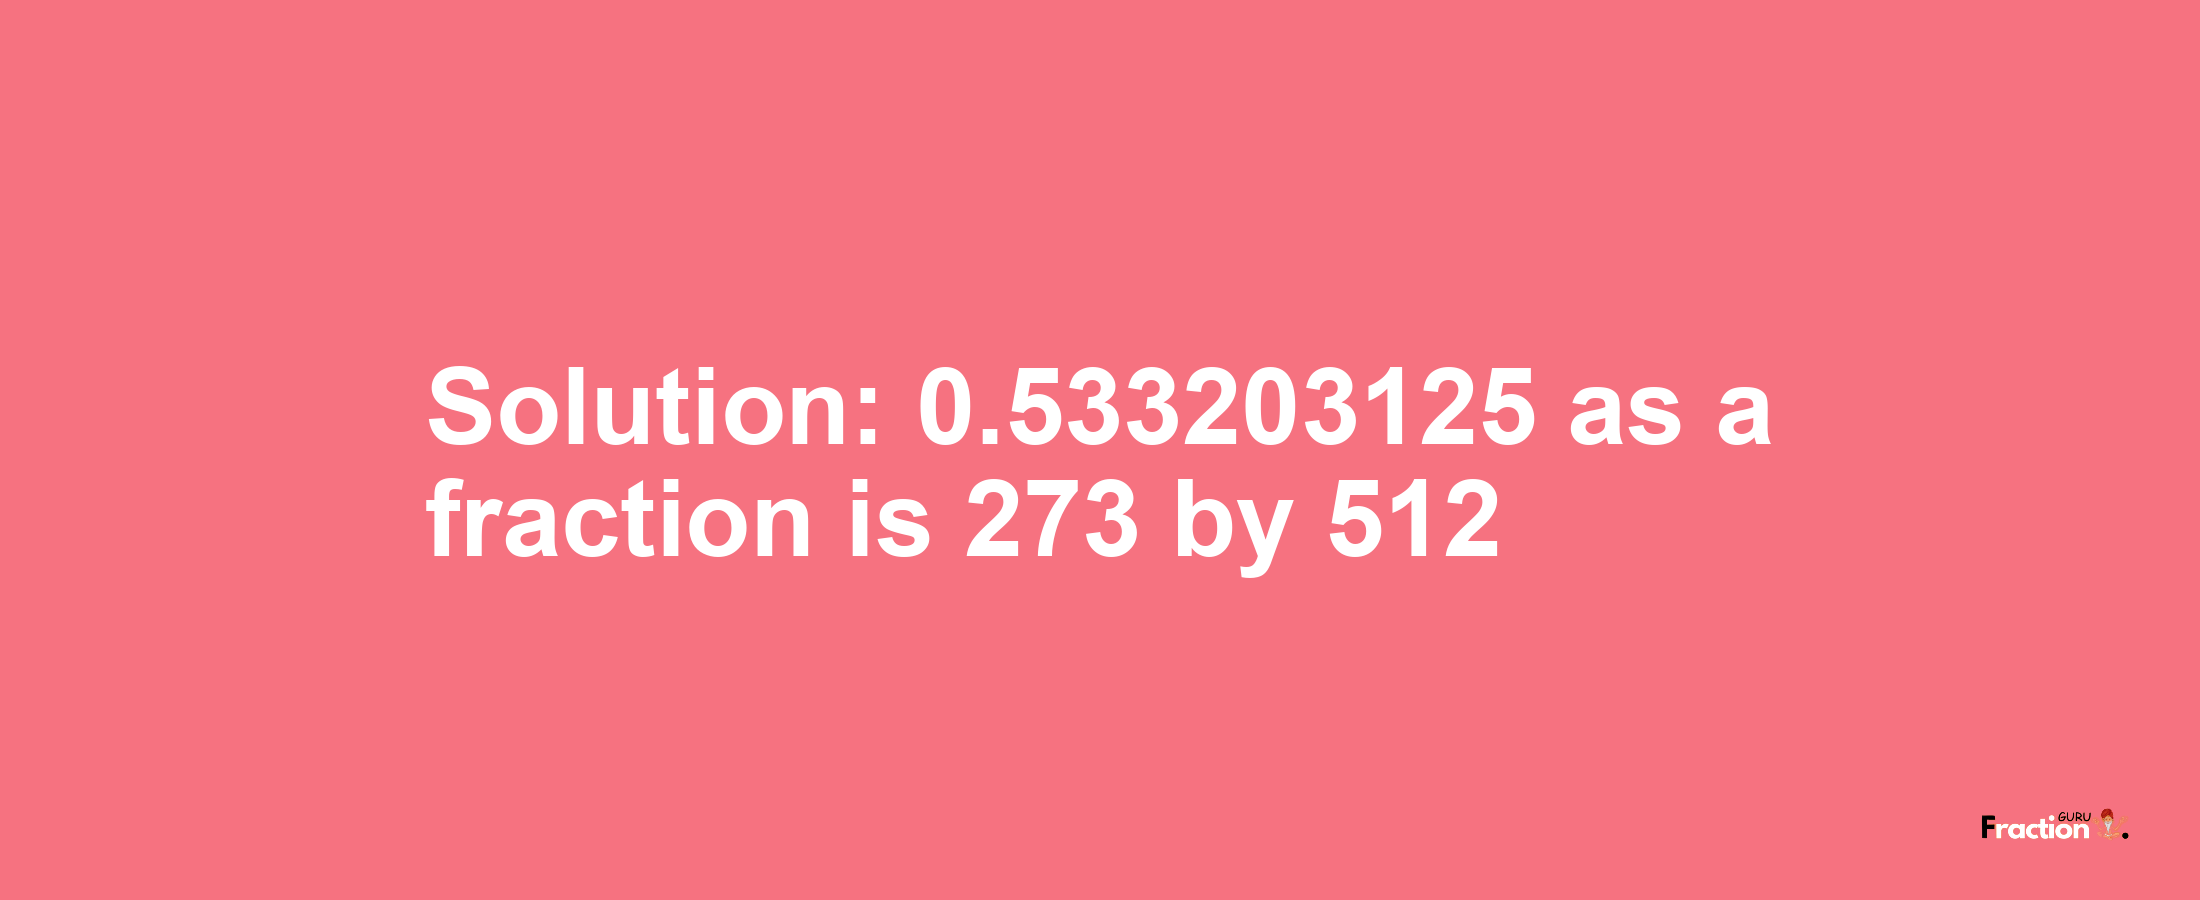 Solution:0.533203125 as a fraction is 273/512